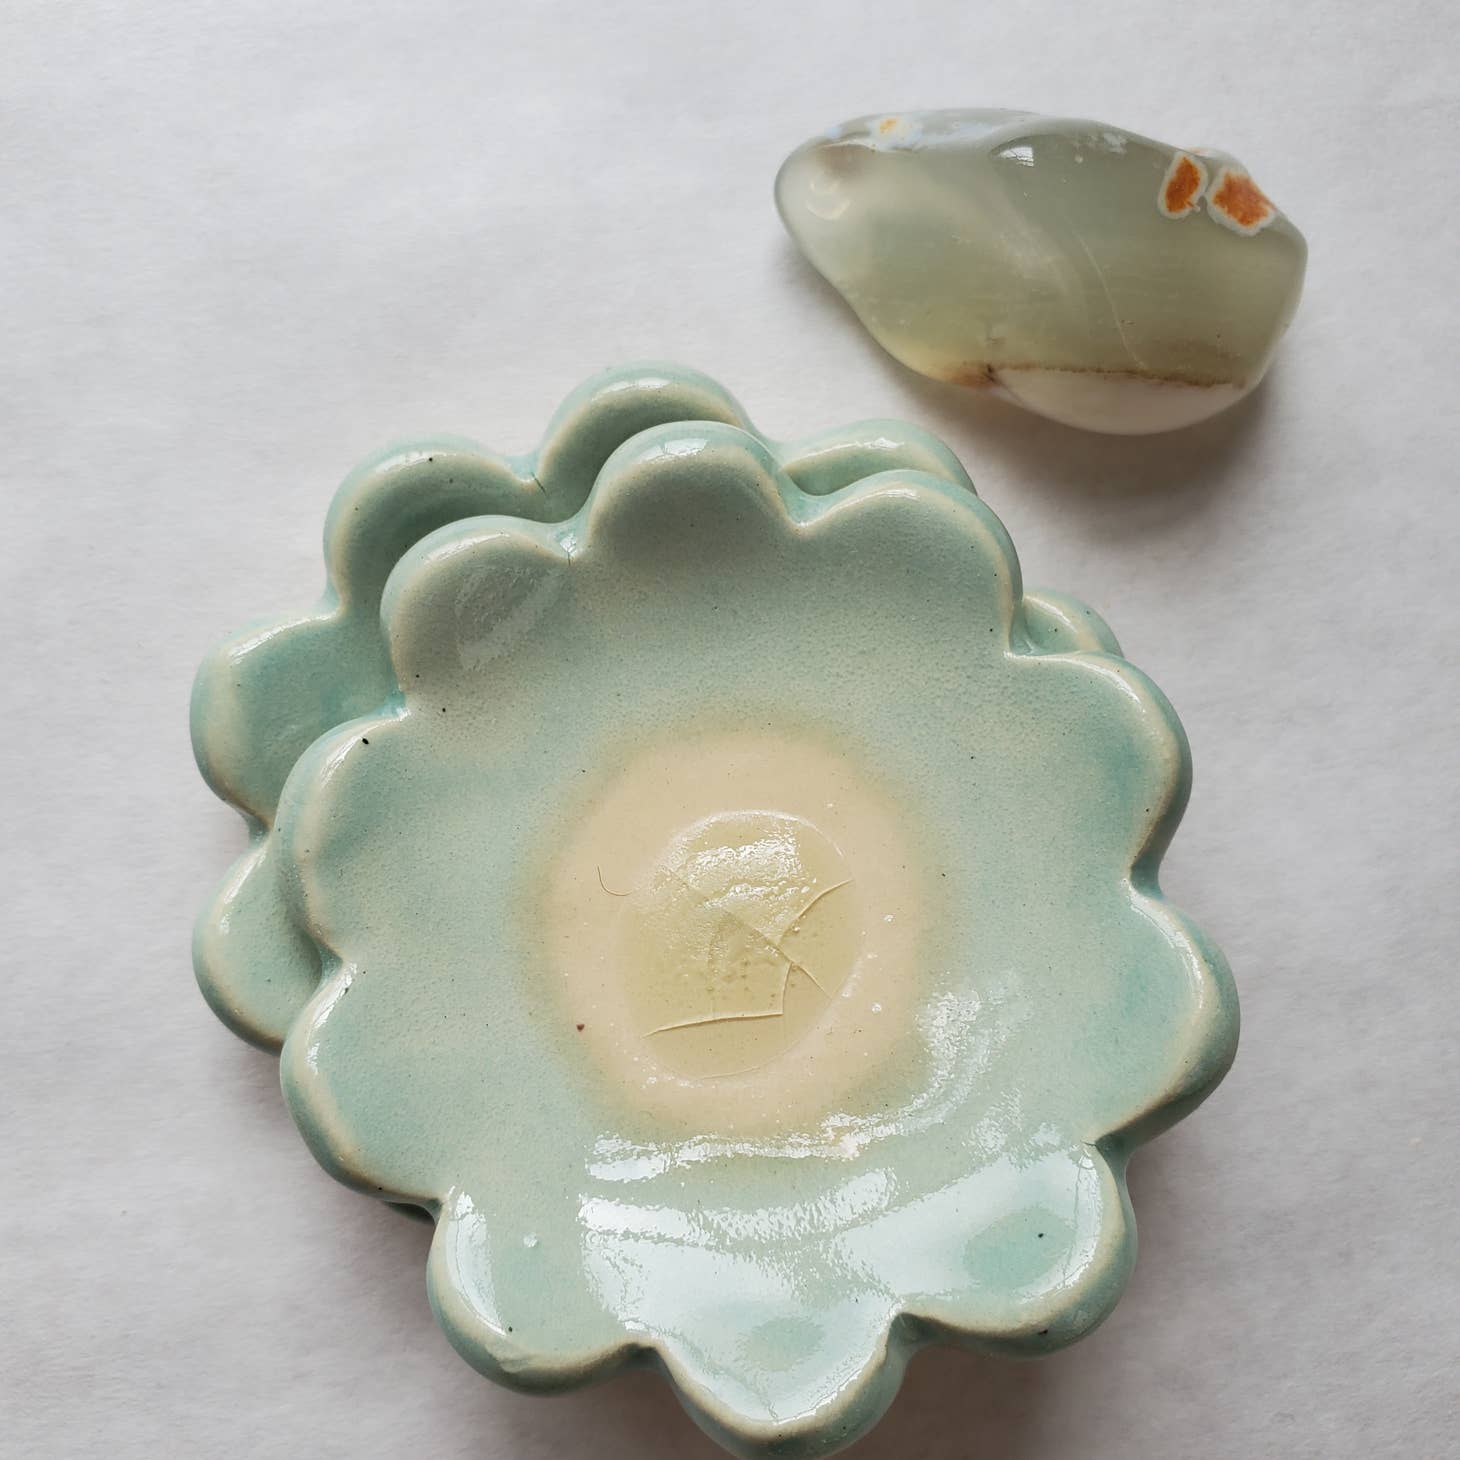 A teeny tiny dish for your rings & other little findings. Some styles feature gold luster accents.  Each one is one of a kind - made with love & enthusiasm by Curious Clay.